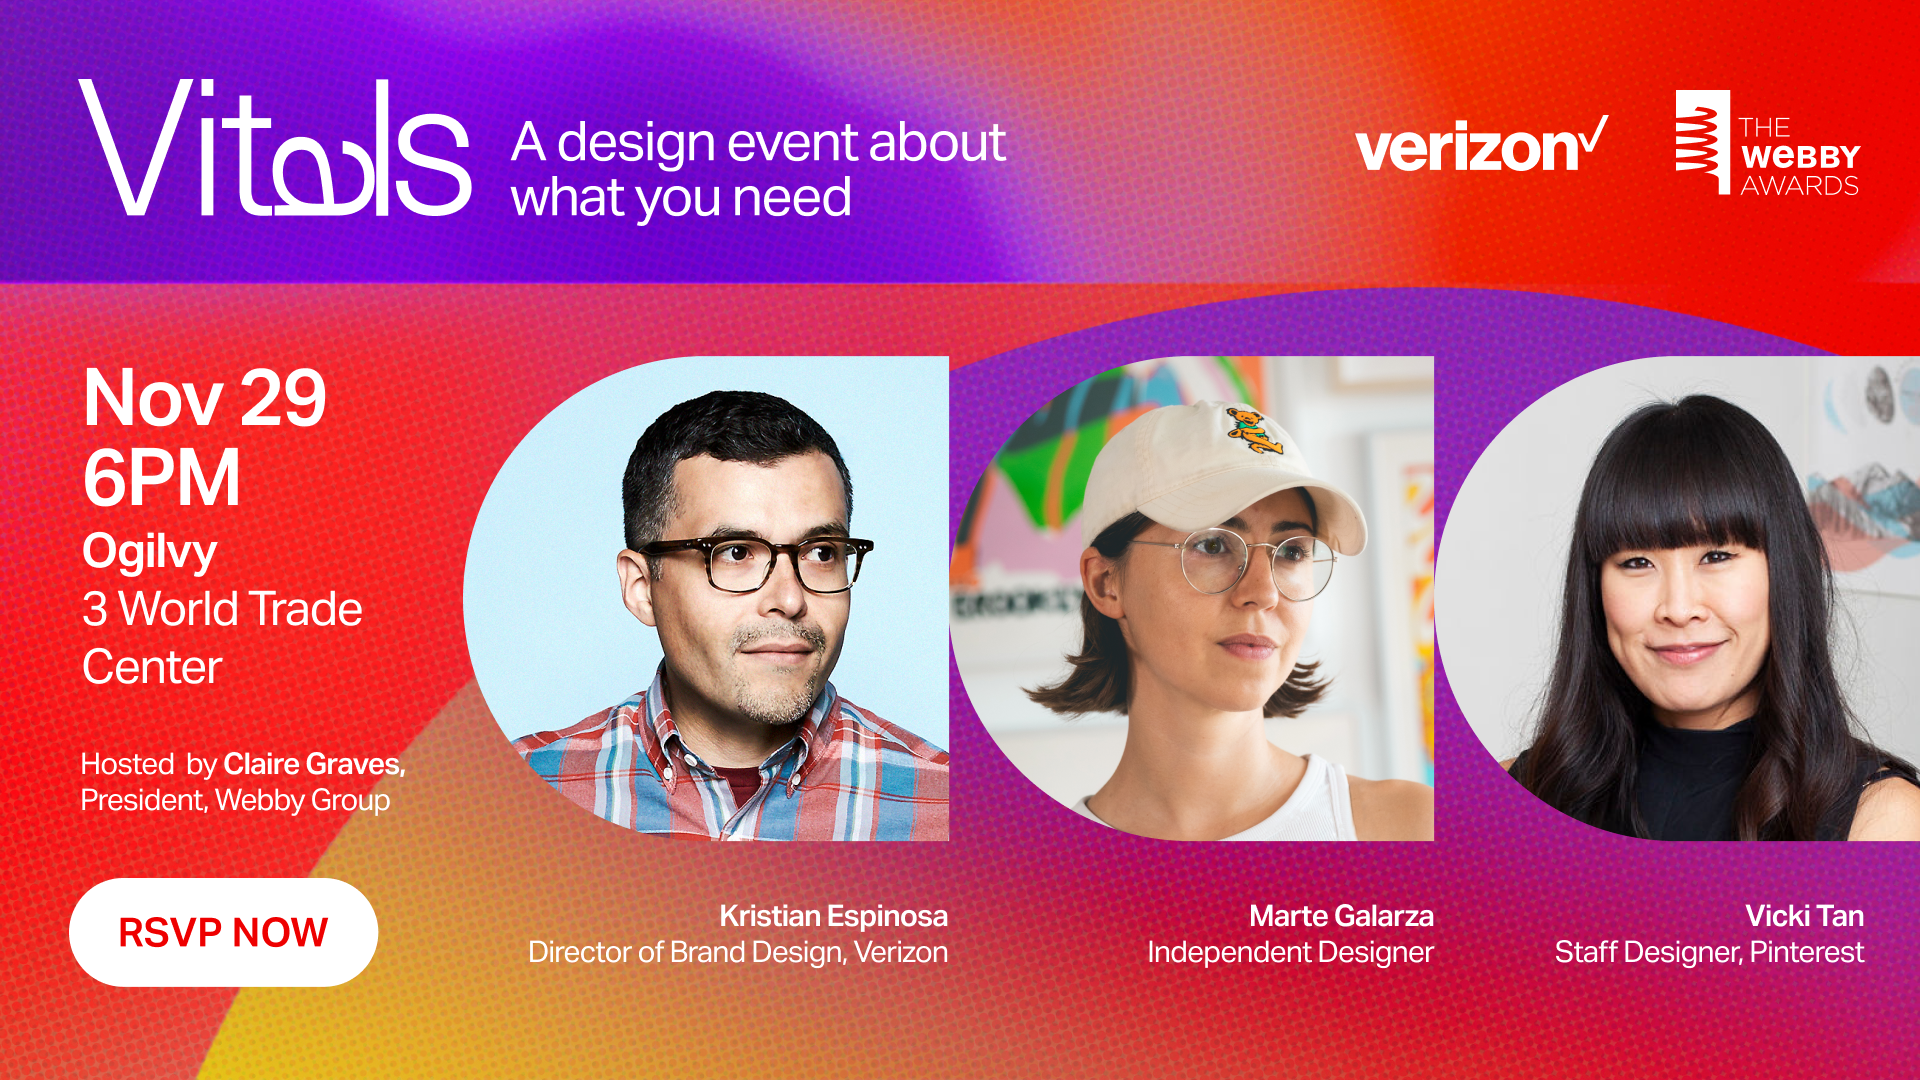 Vitals: A Design Event About What You Need   by The Webby Awards